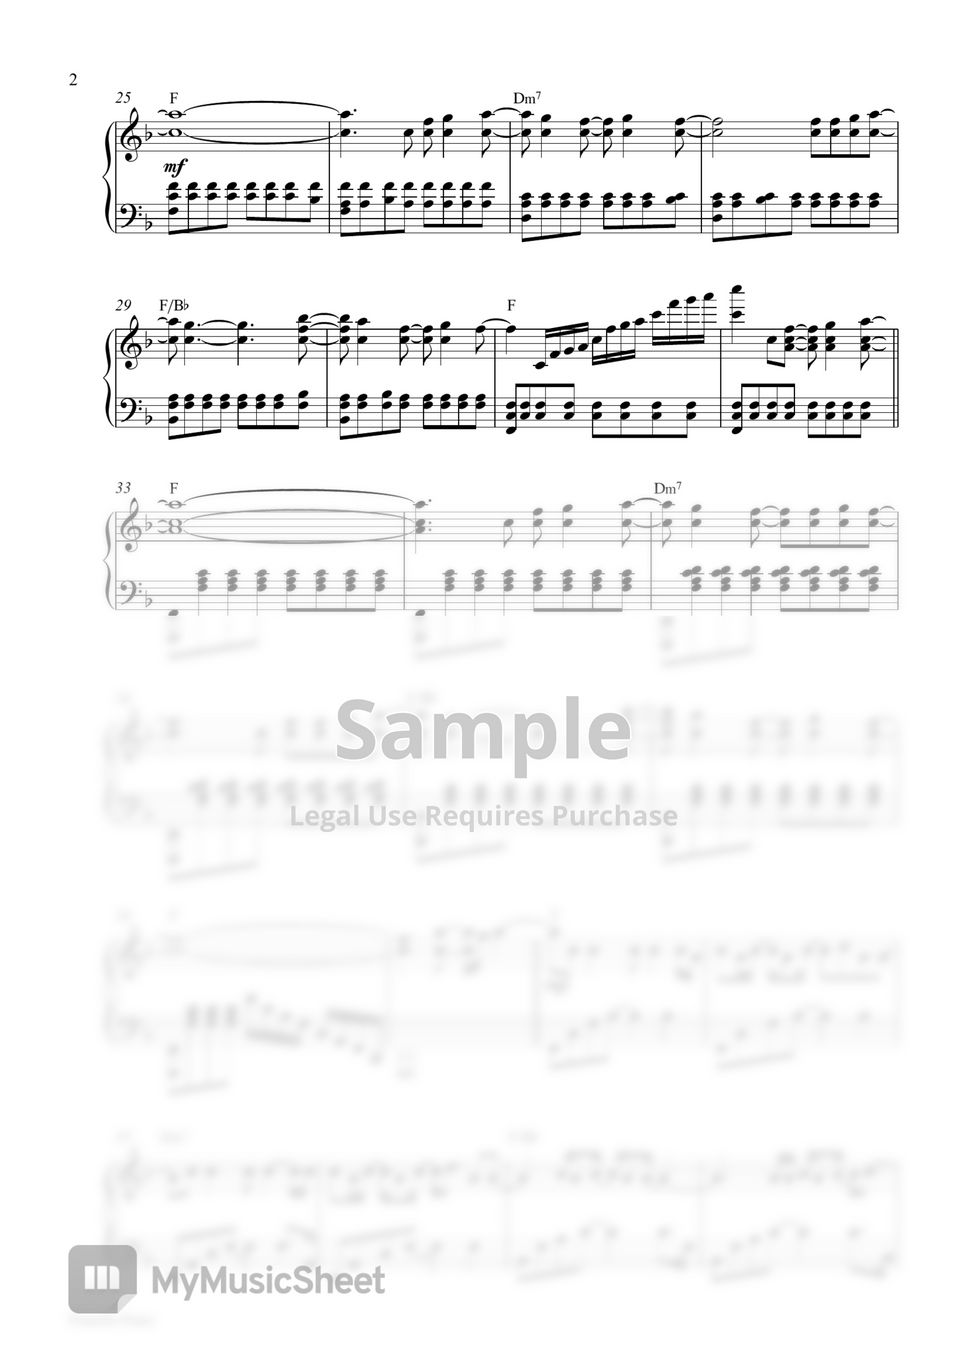 Bruno Mars - Just The Way You Are (Piano Sheet) by Pianella Piano